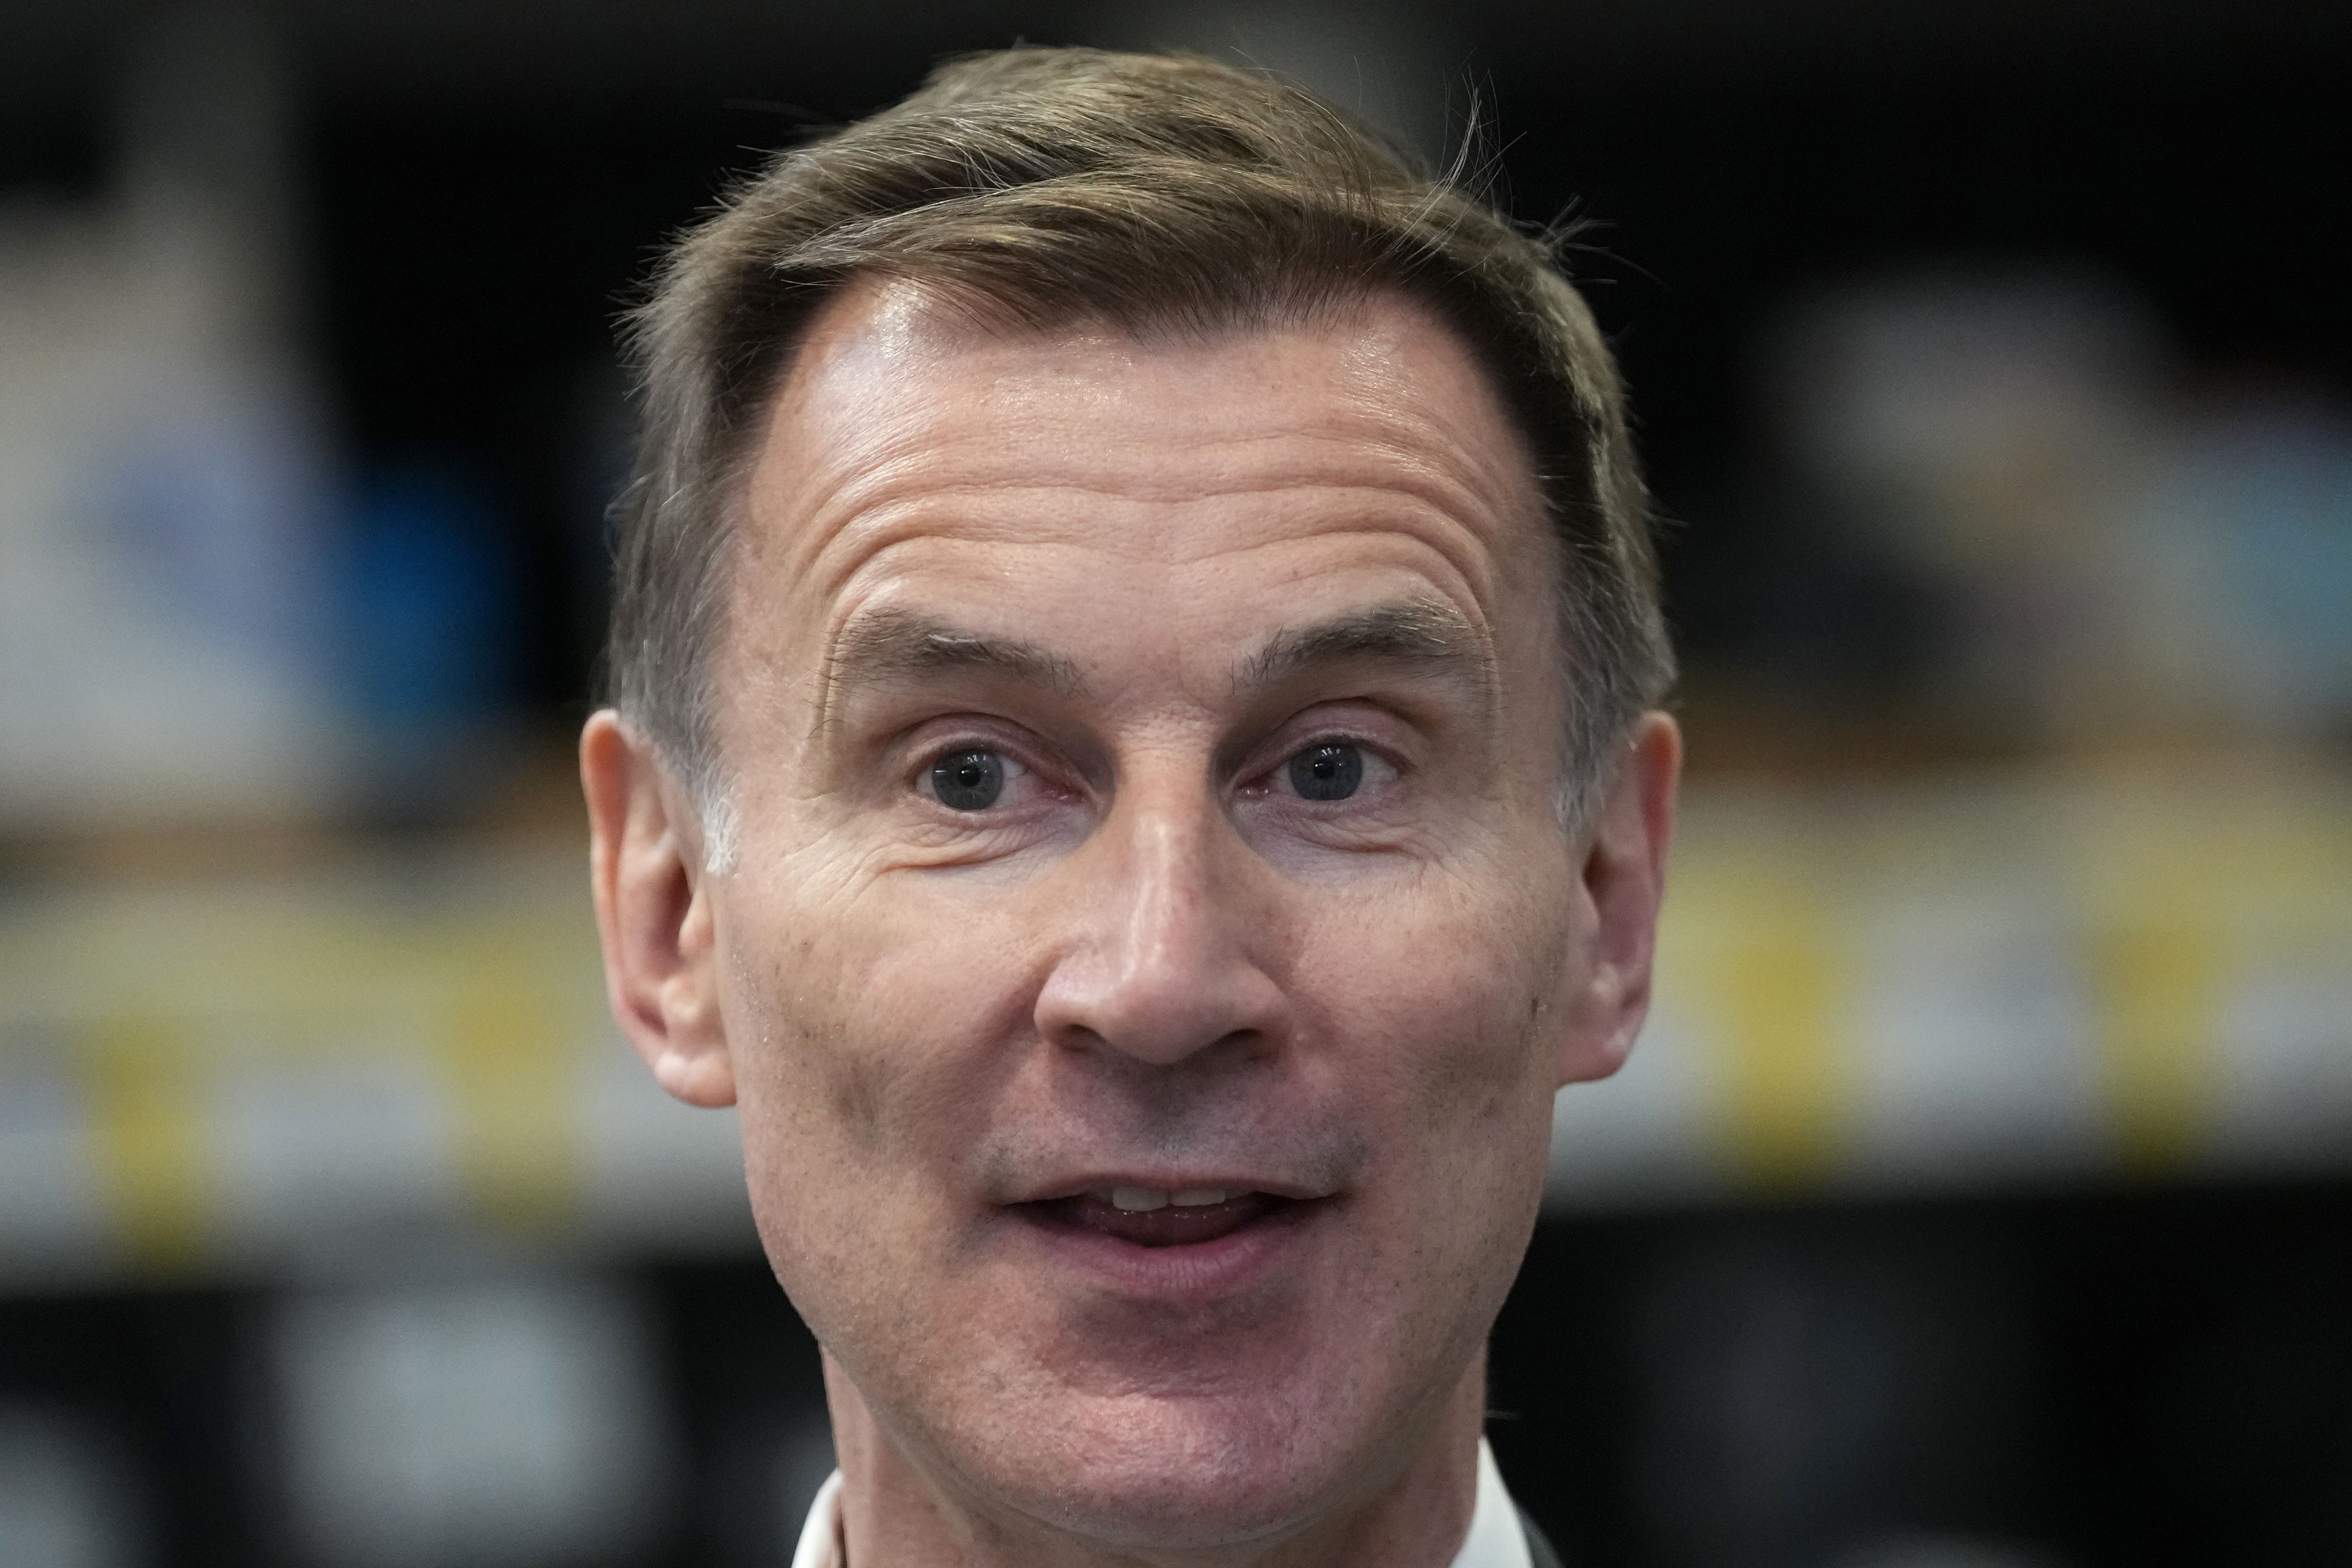 Chancellor Jeremy Hunt said he expects significant losses for the Tories in the local elections (PA)